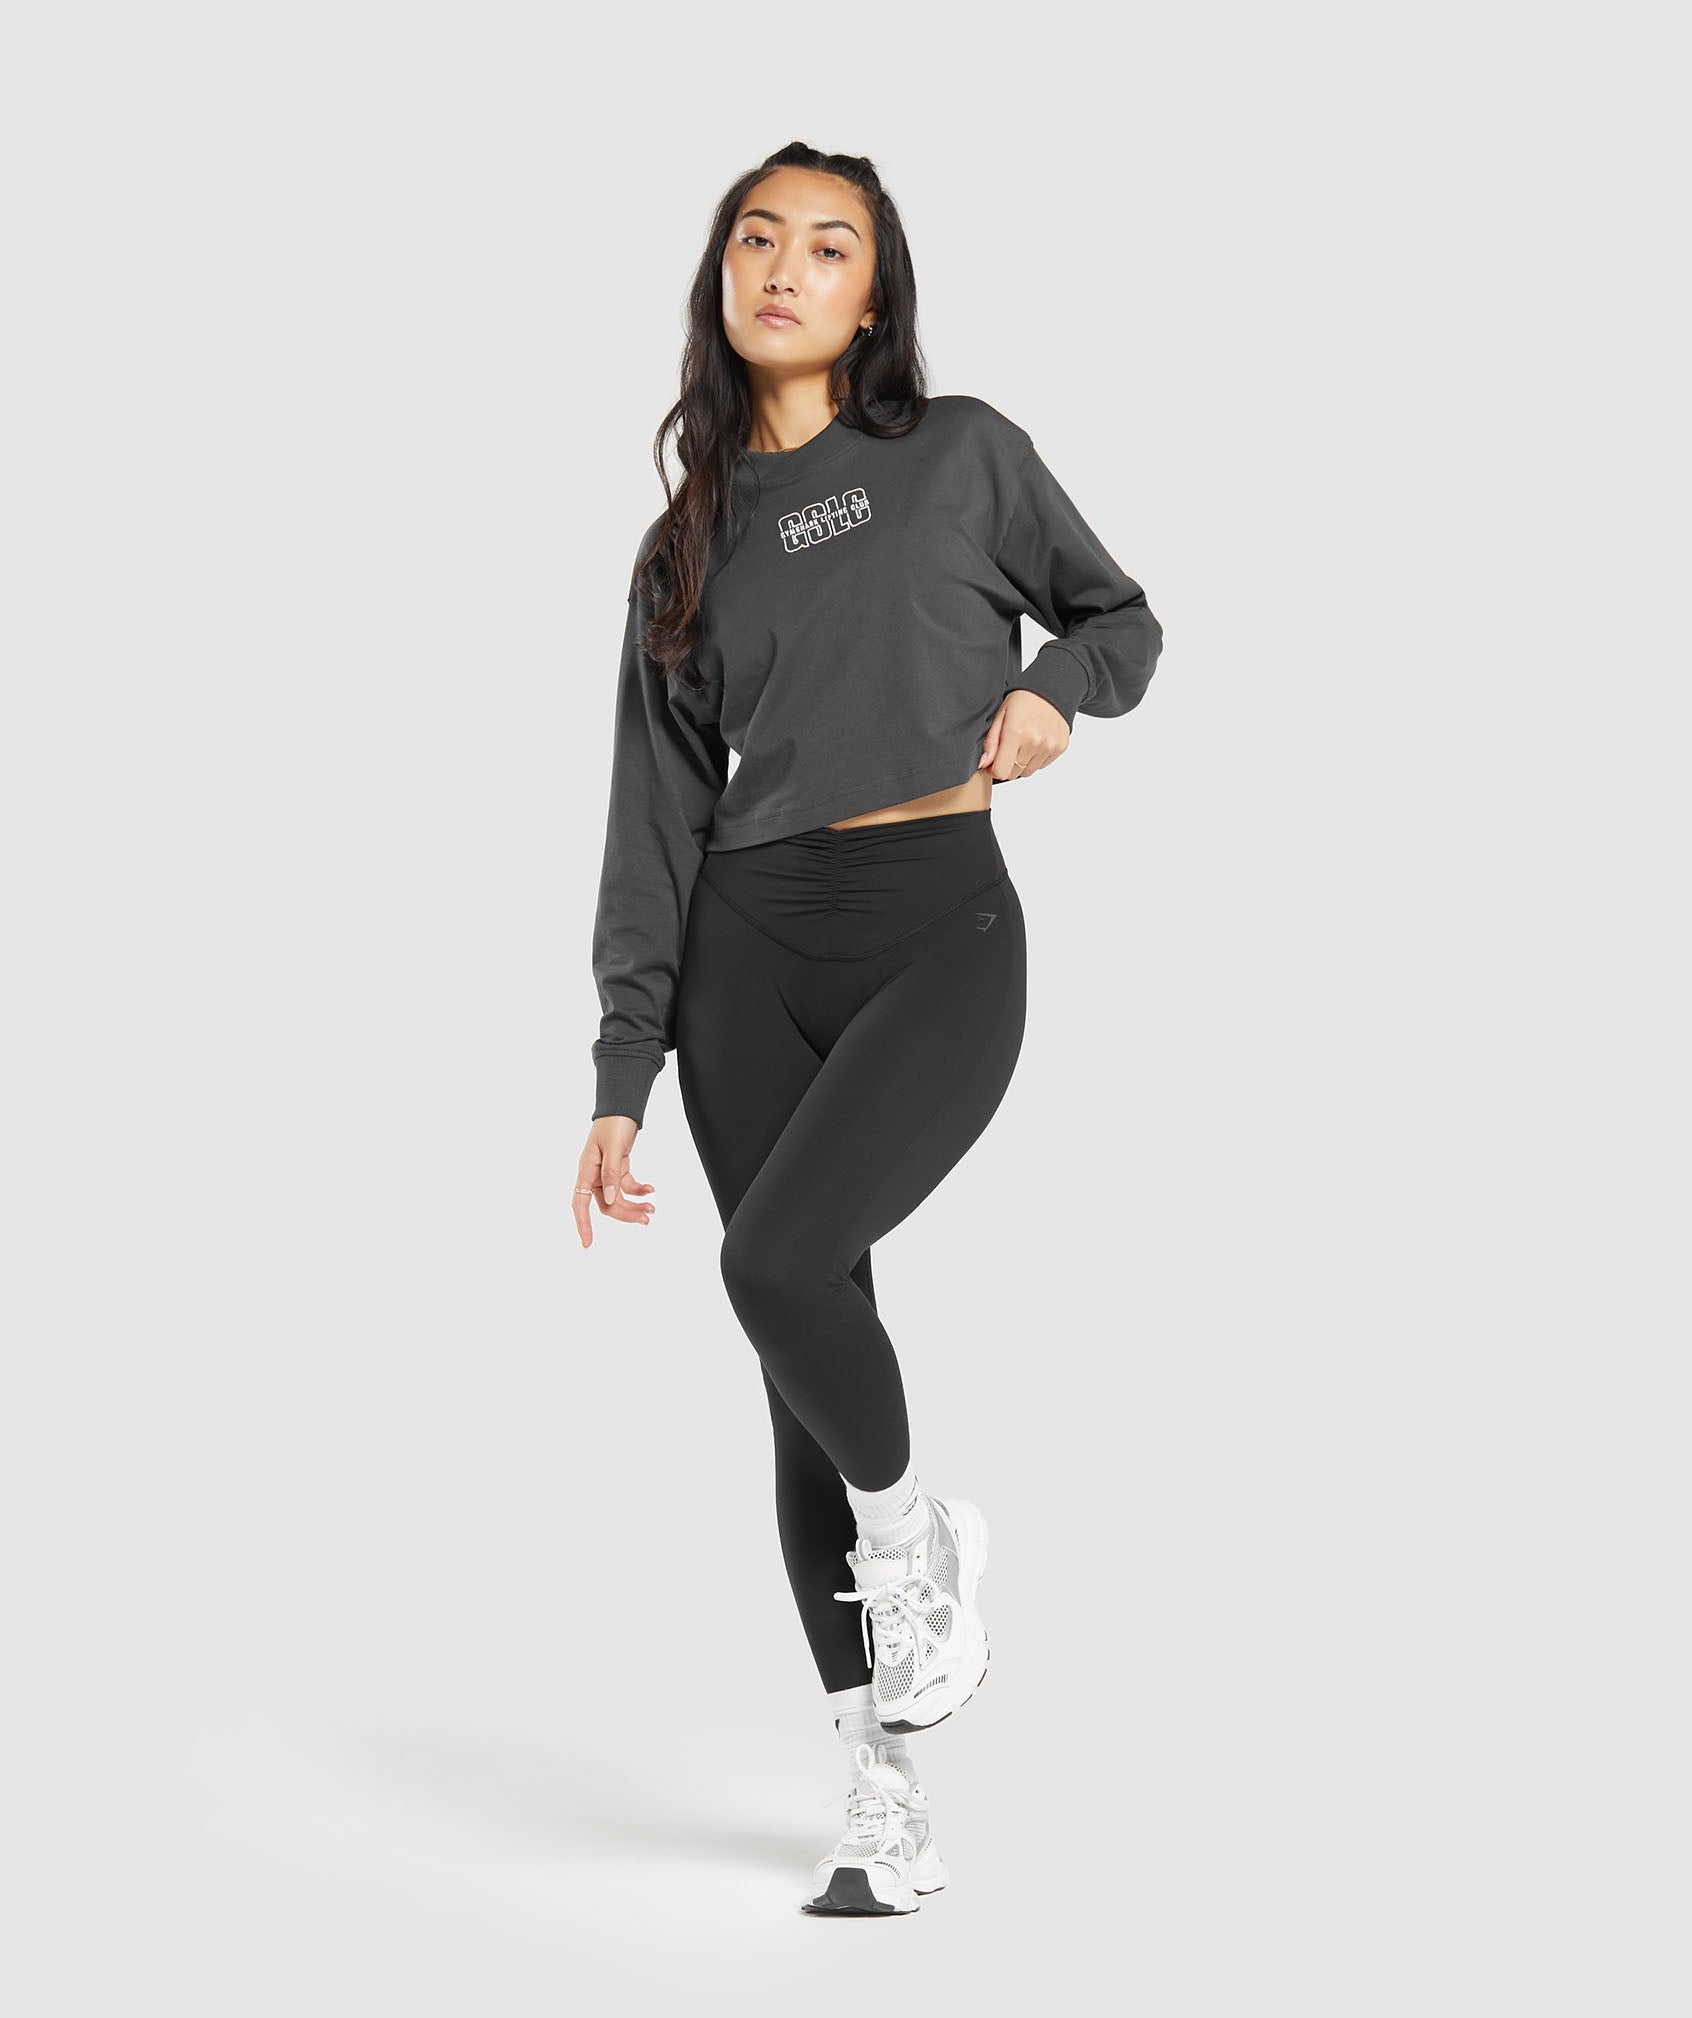 Outline Graphic Oversized Long Sleeve Top in Asphalt Grey - view 4